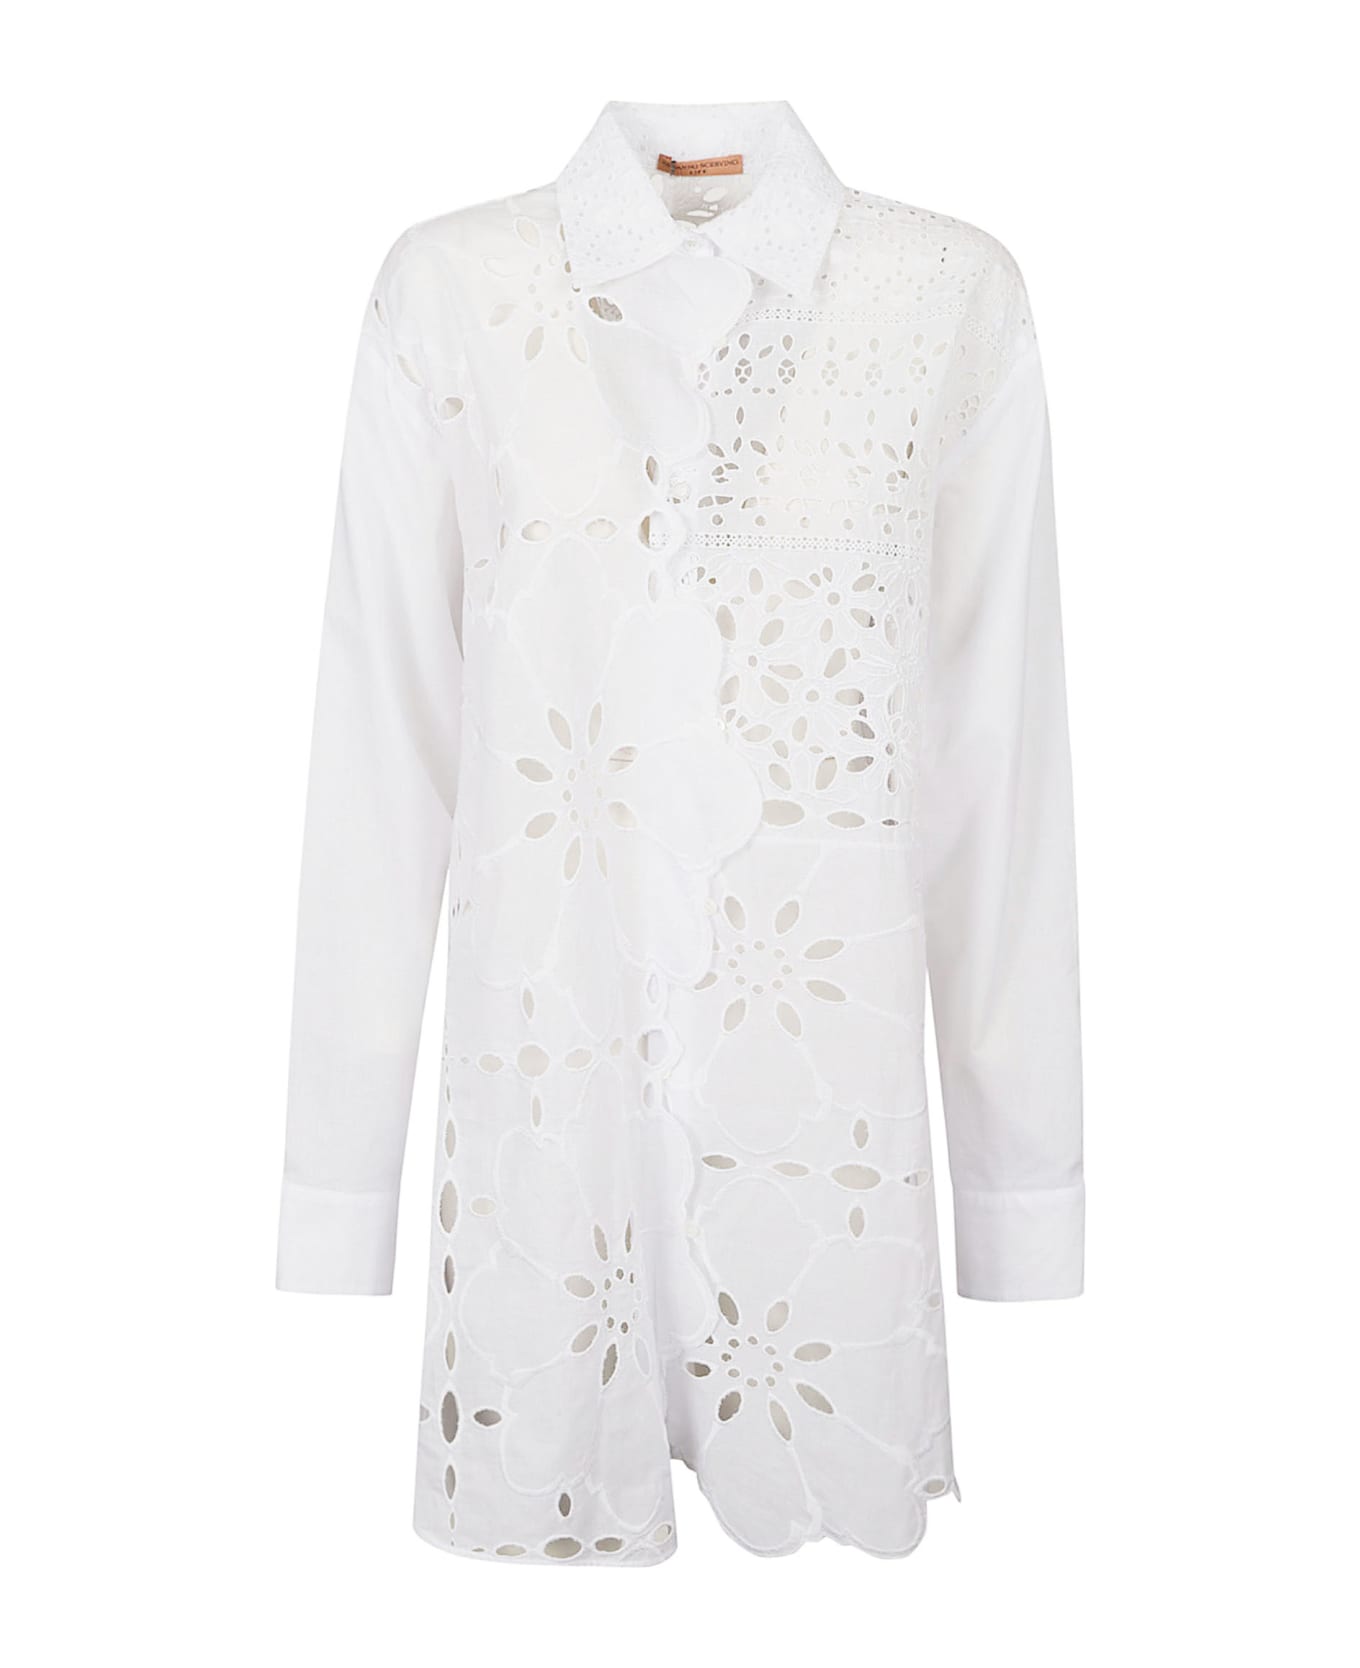 Ermanno Scervino Floral Perforated Oversized Shirt - Bright White シャツ